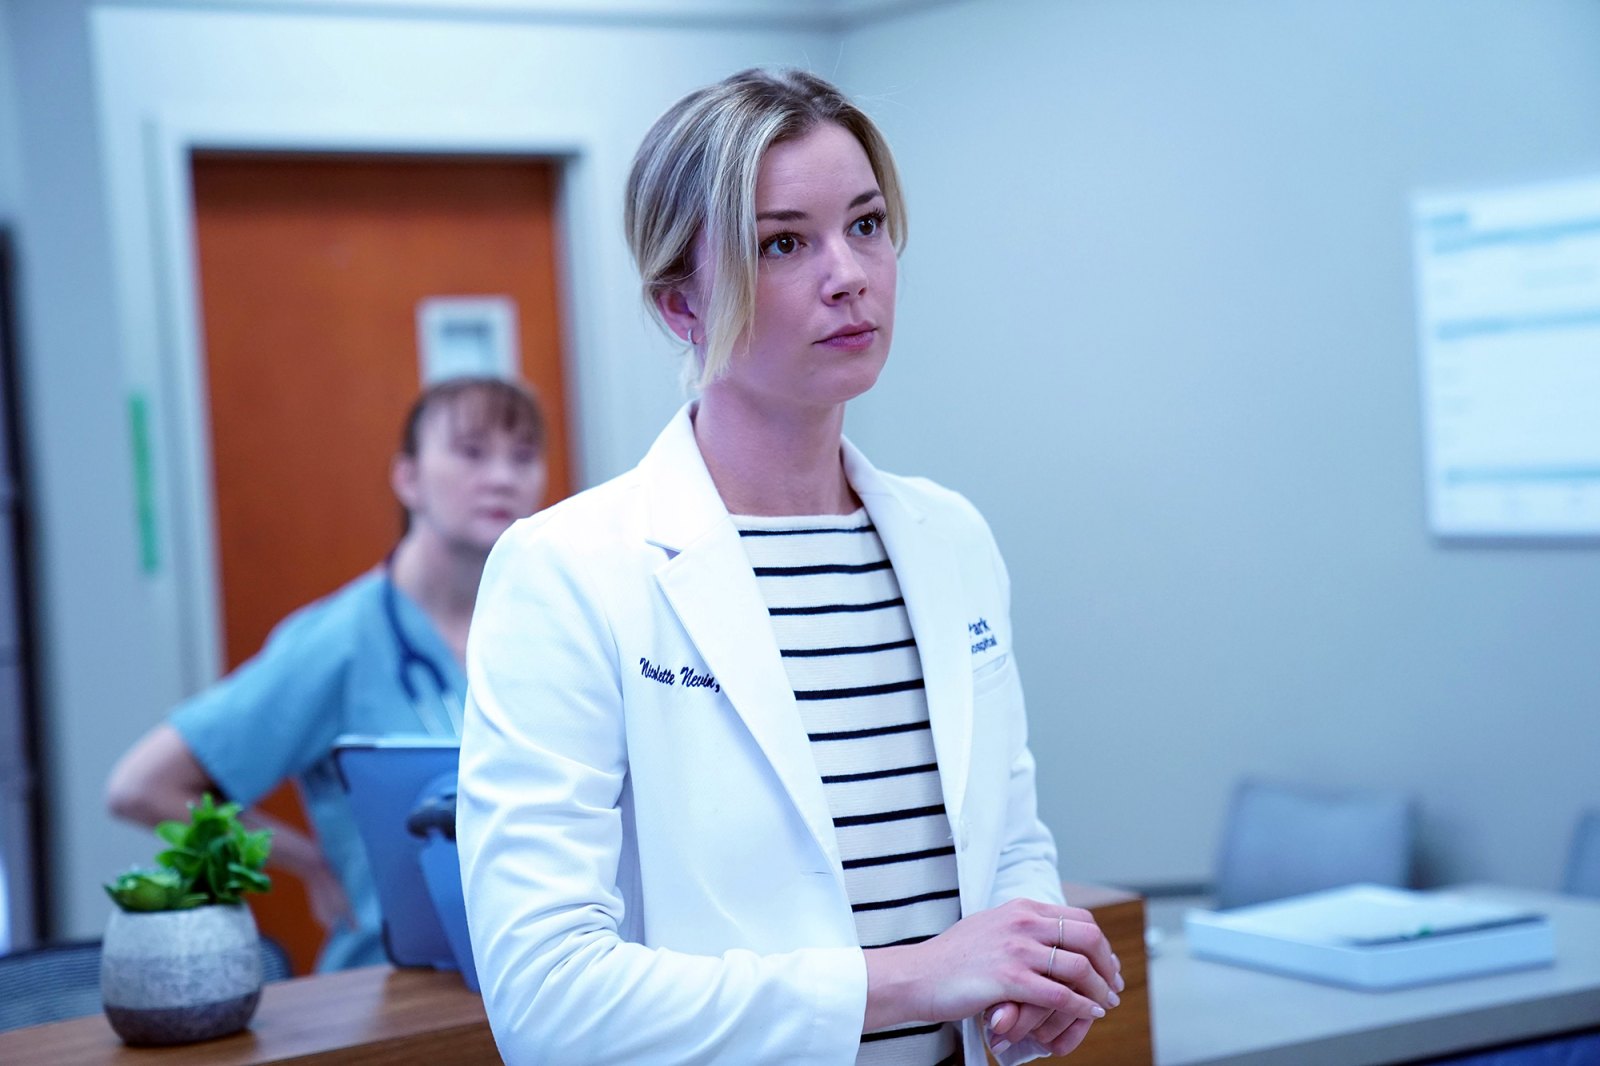 Emily VanCamp Is Returning to The Resident for the Season 5 Finale After Exiting the Show